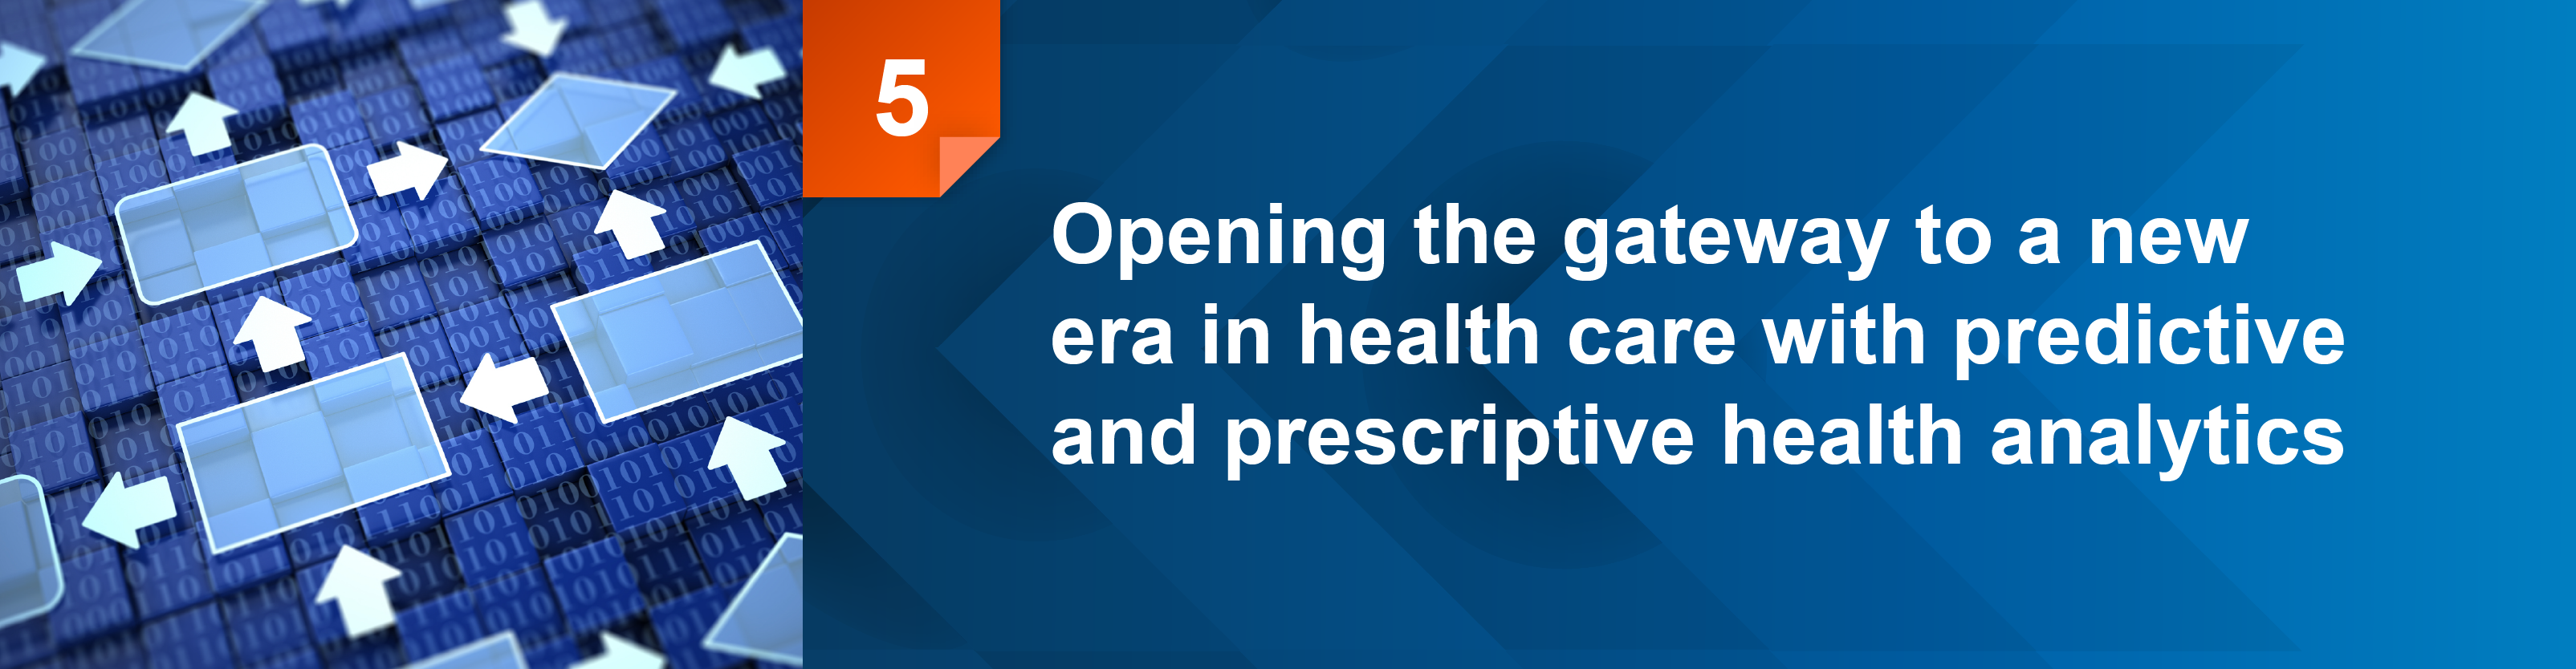 Opening the gateway to a new era in health care with predictive and prescriptive health analytics